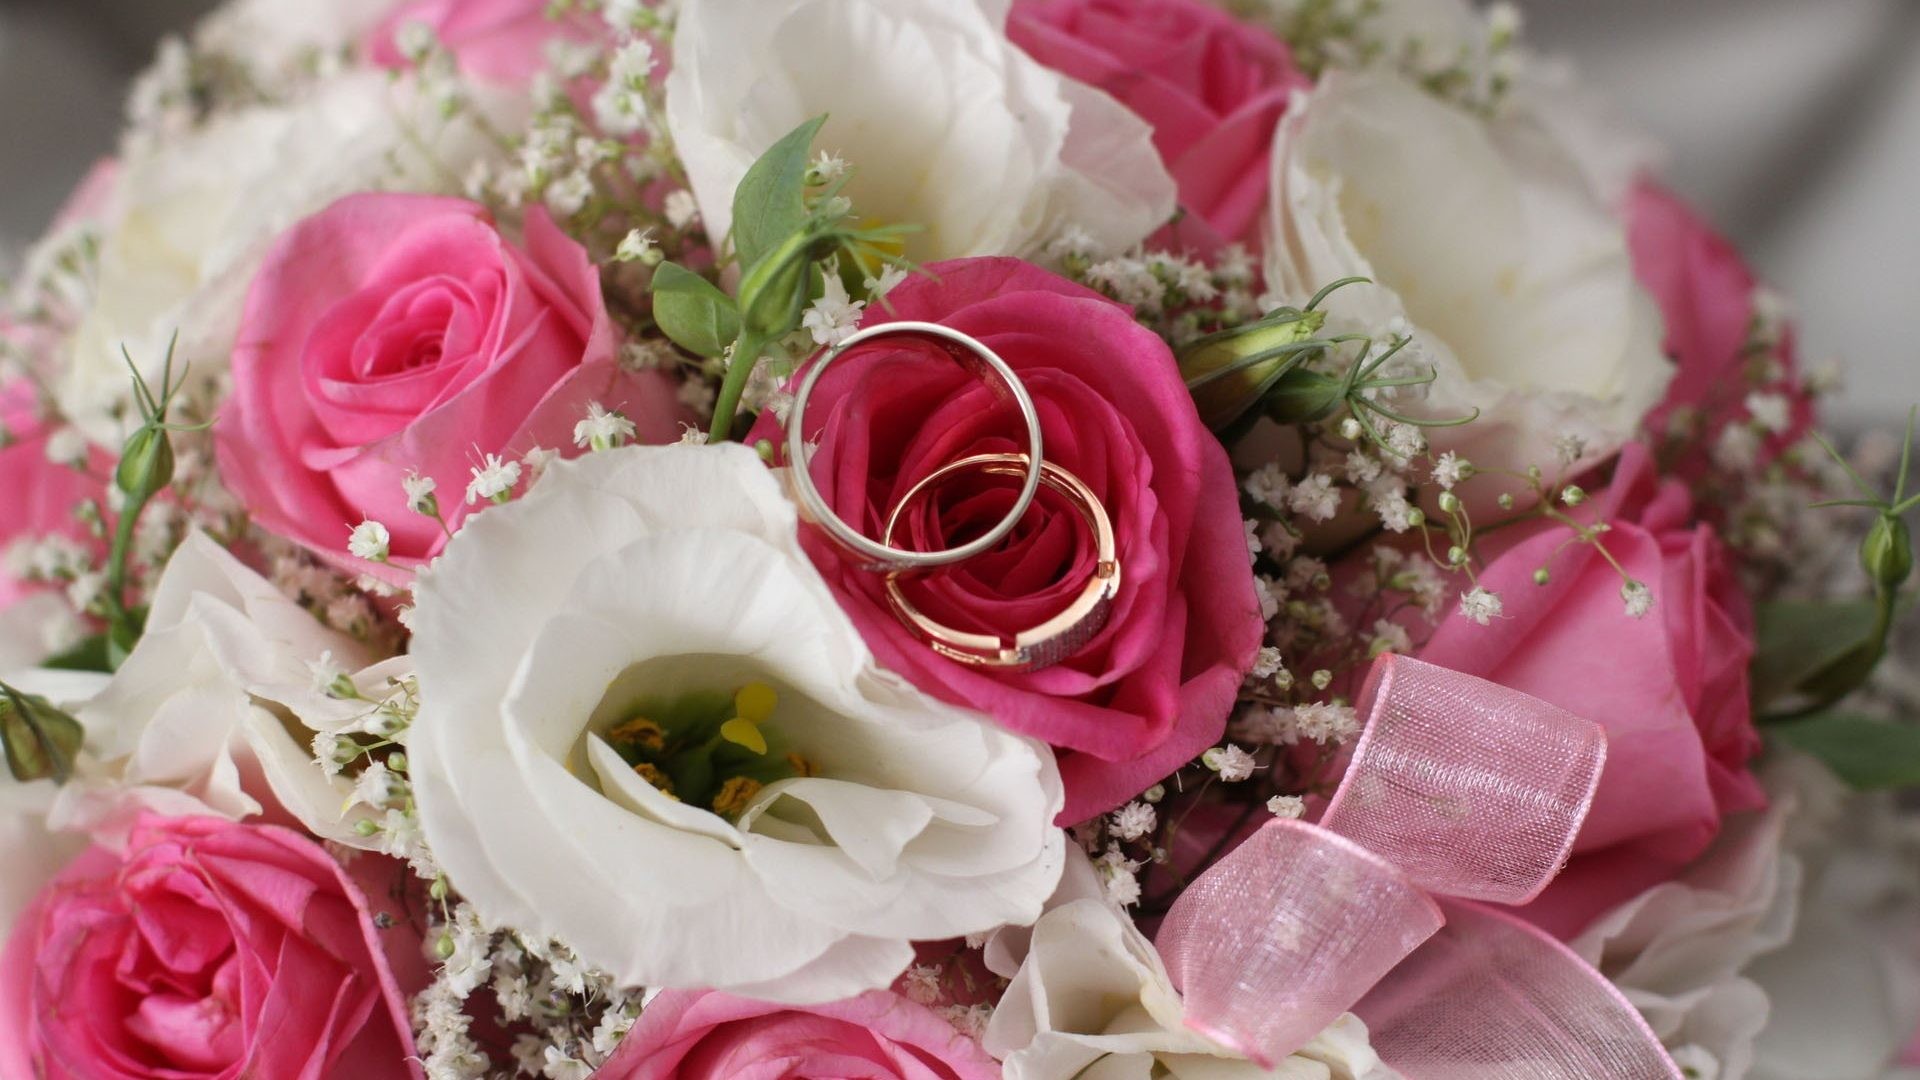 1920x1080 Weding Flowers Ring Roses Pink Wedding Bouquet Rose Holidays 1080p  Wallpaper - 1920x1200